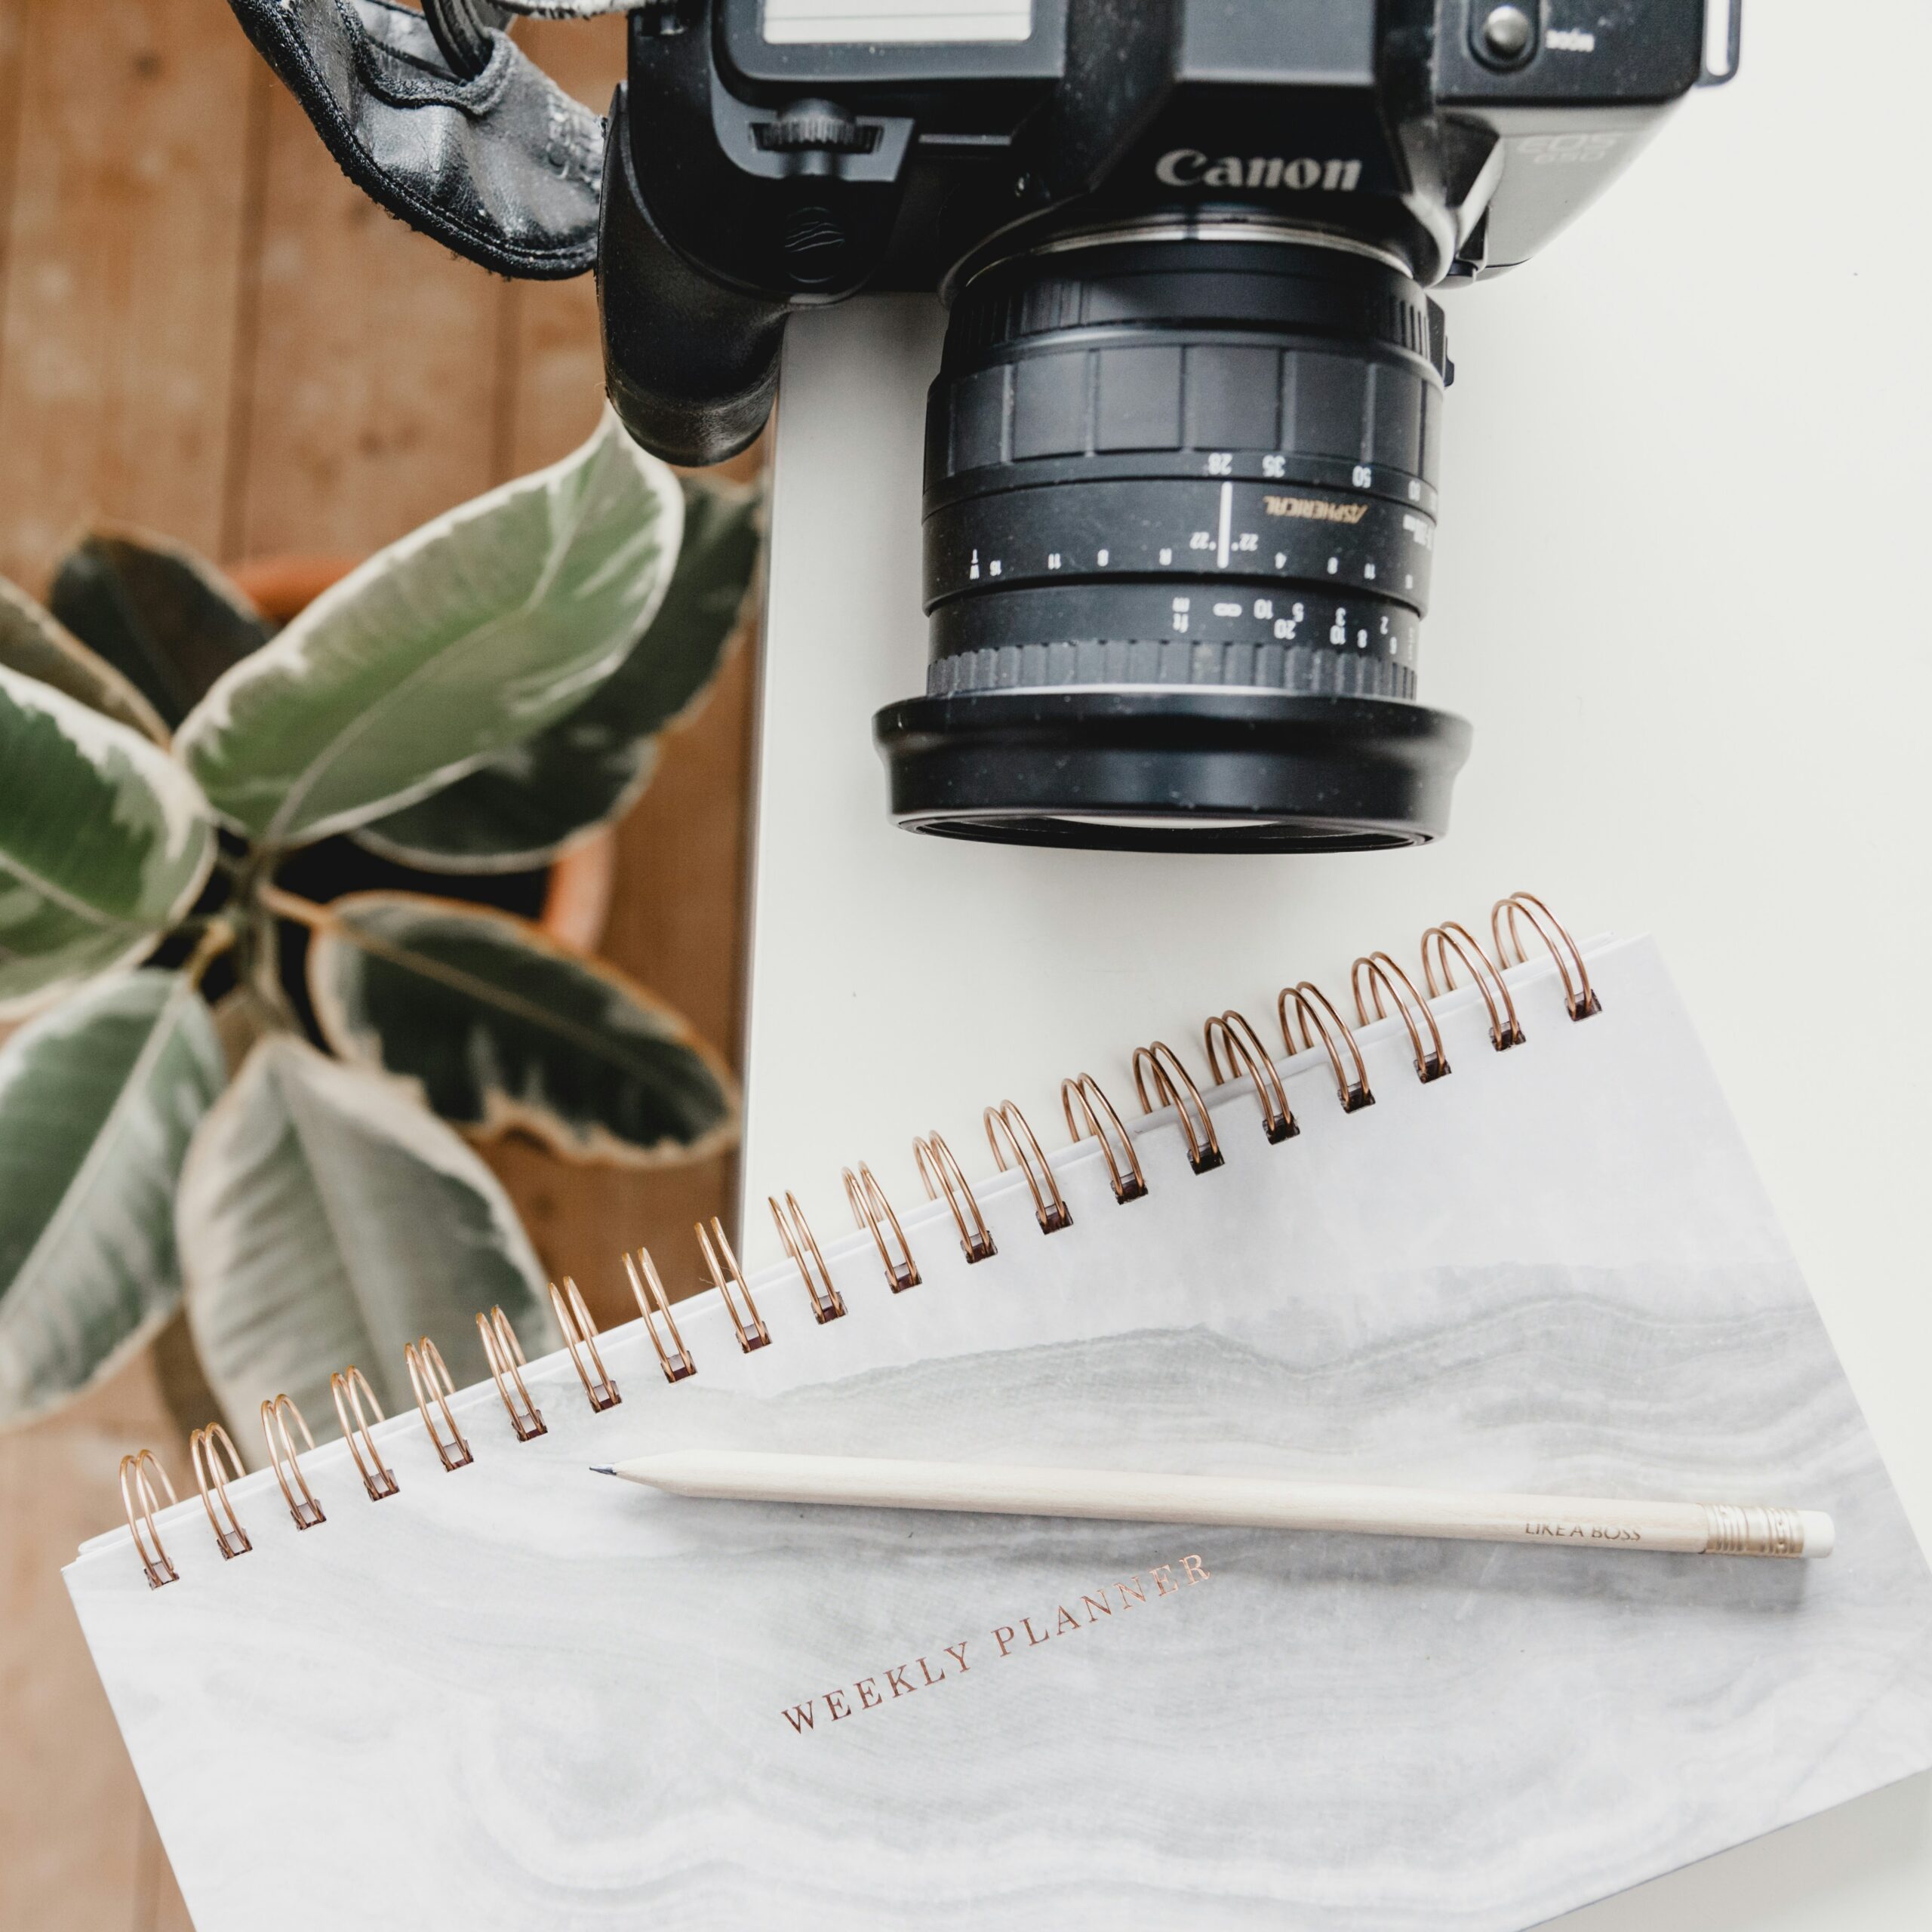 desk with DSLR camera and 3-day marketing challenge for photographers